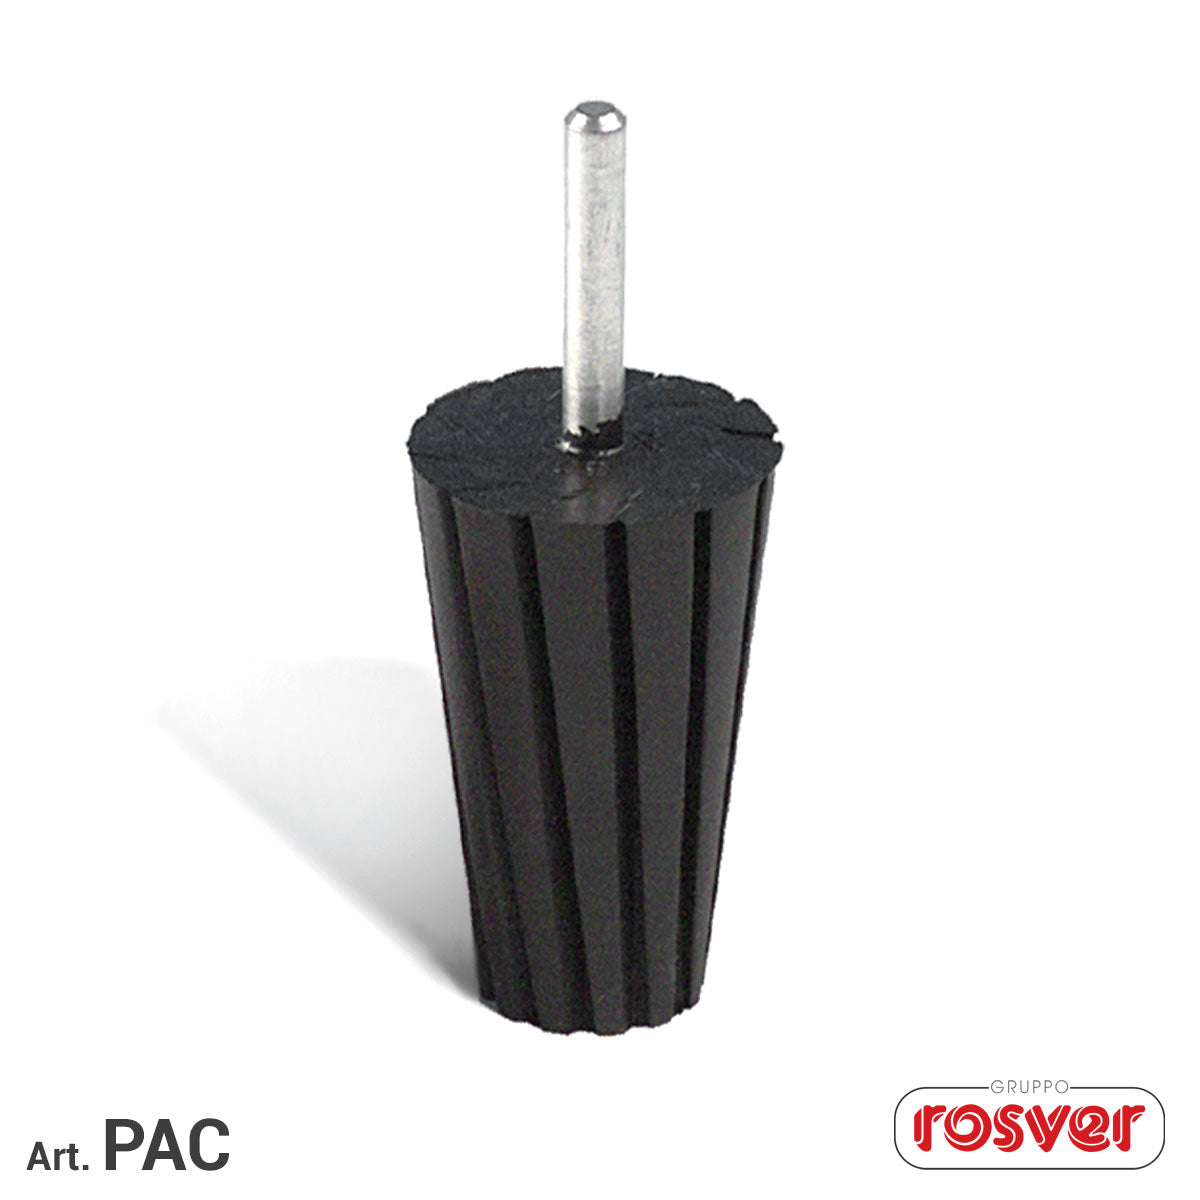 Centrifugal Expansion Conical Sleeve Holders Rosver - PAC - Conf.1pz